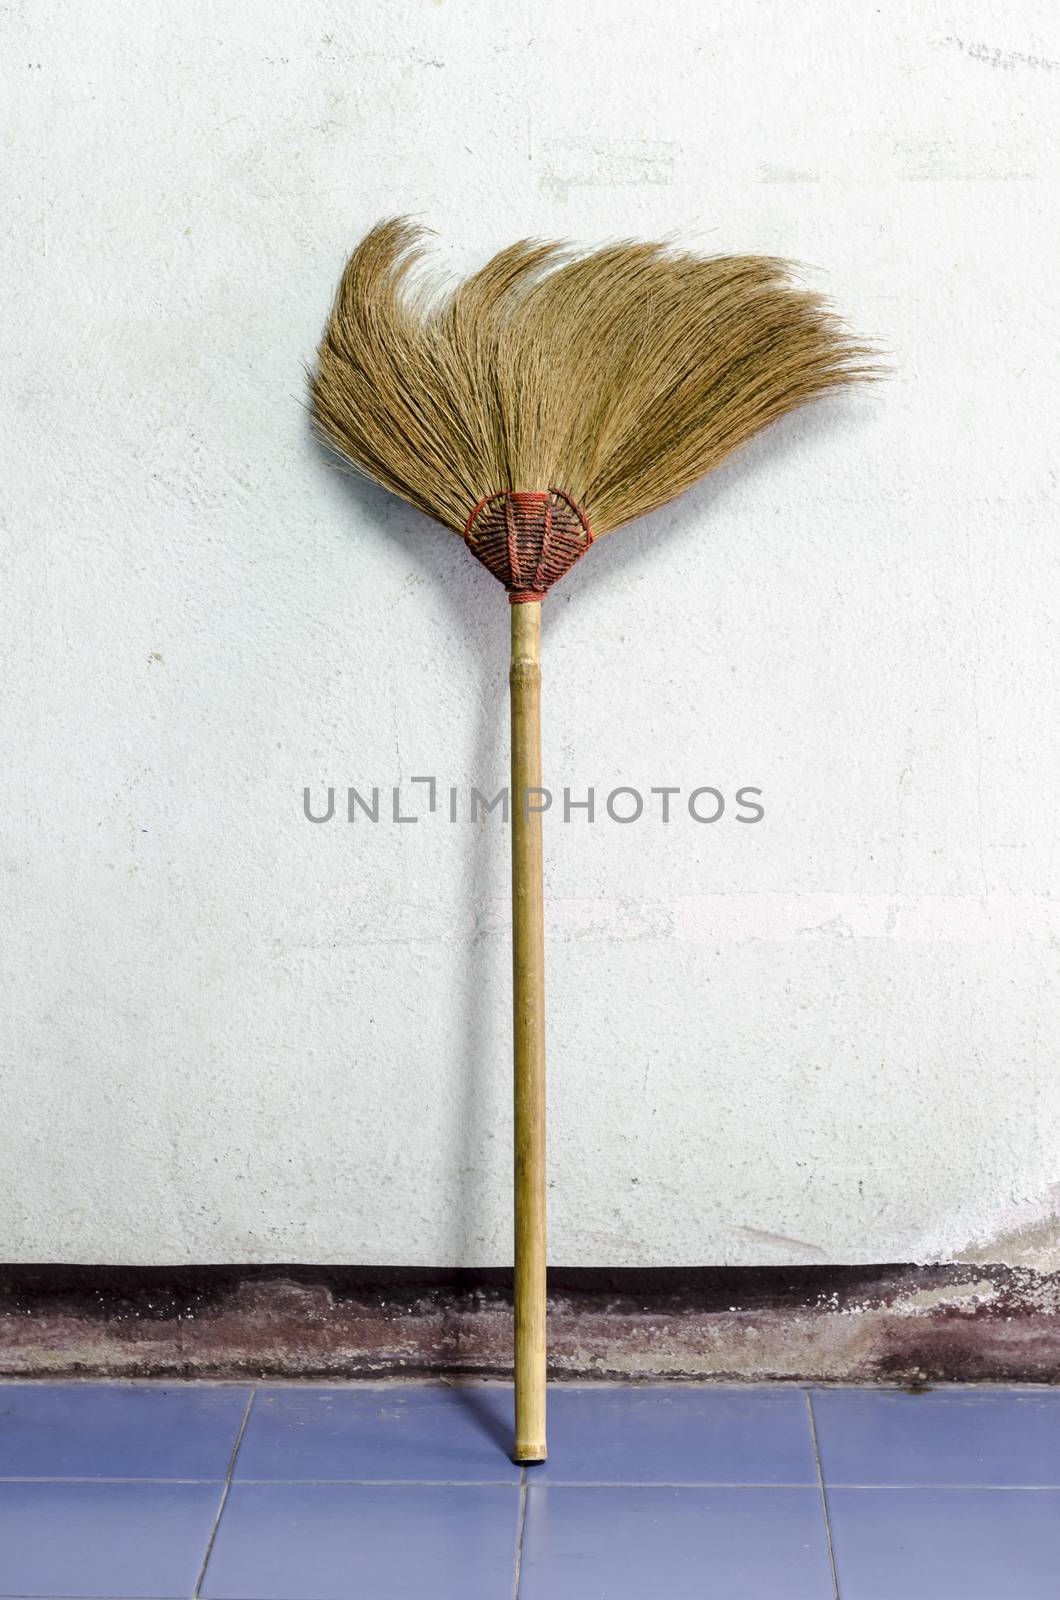 broom for cleaning in house